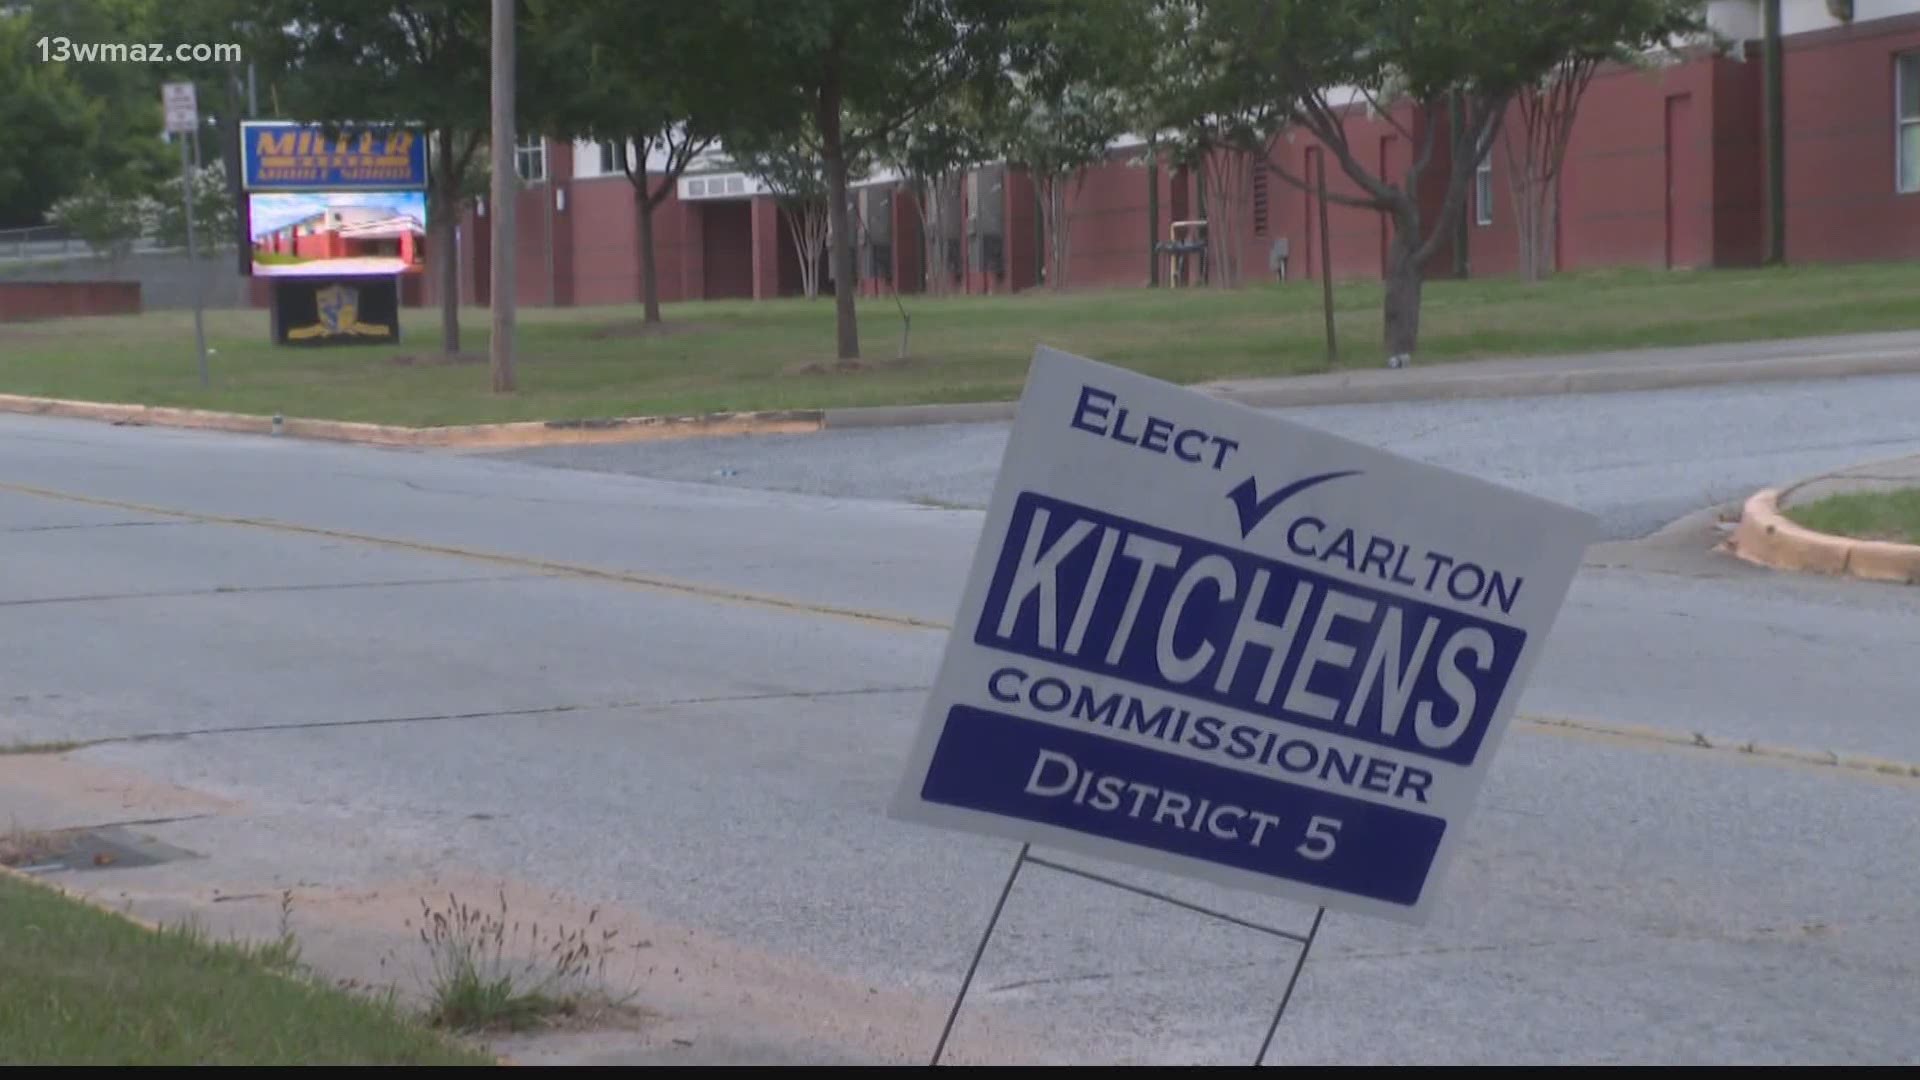 Superior Court records show that judges have approved at least three orders requested by women against District 5 candidate Carlton Kitchens